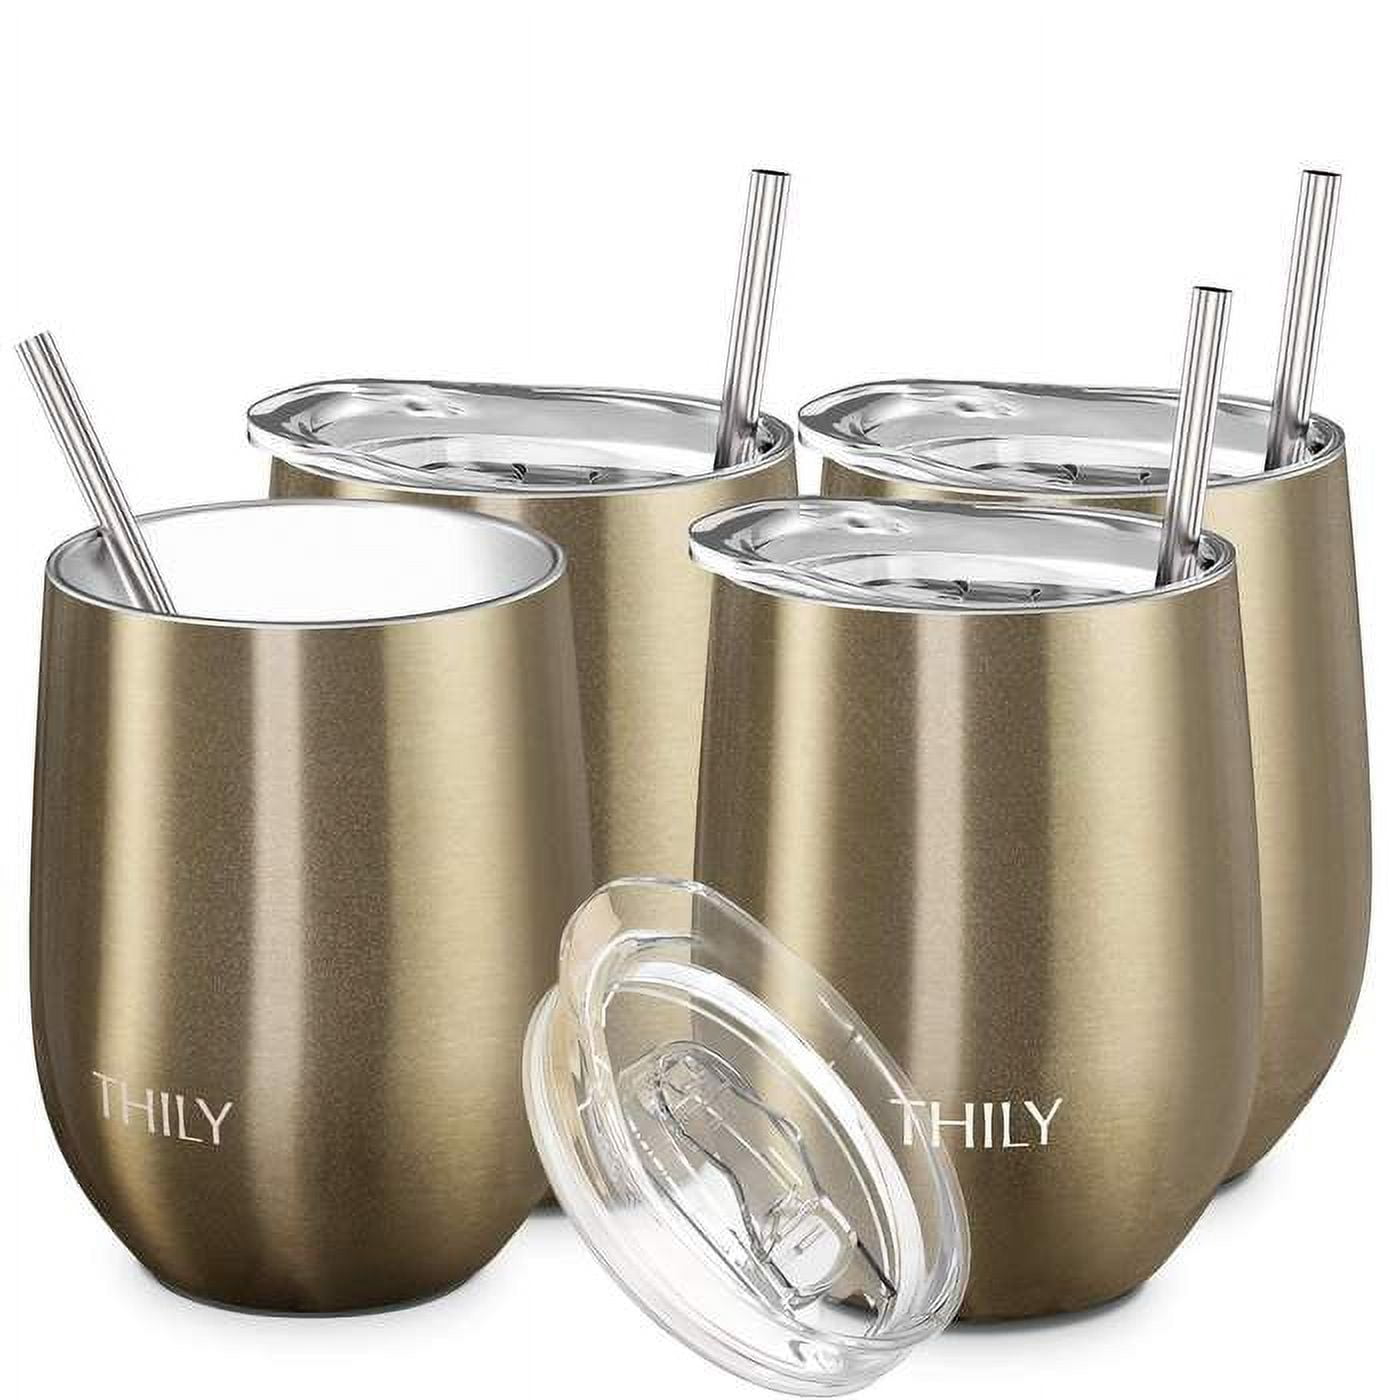 Travel Wine Glasses Set with Sliding Lids and Straws, Keep Cold for Juice,  Cocktails, Beer, Party, Christmas Gift, Multi Colors Egg Tumbler Shape Wine  Flask - China Wine Mug and Sport Mug